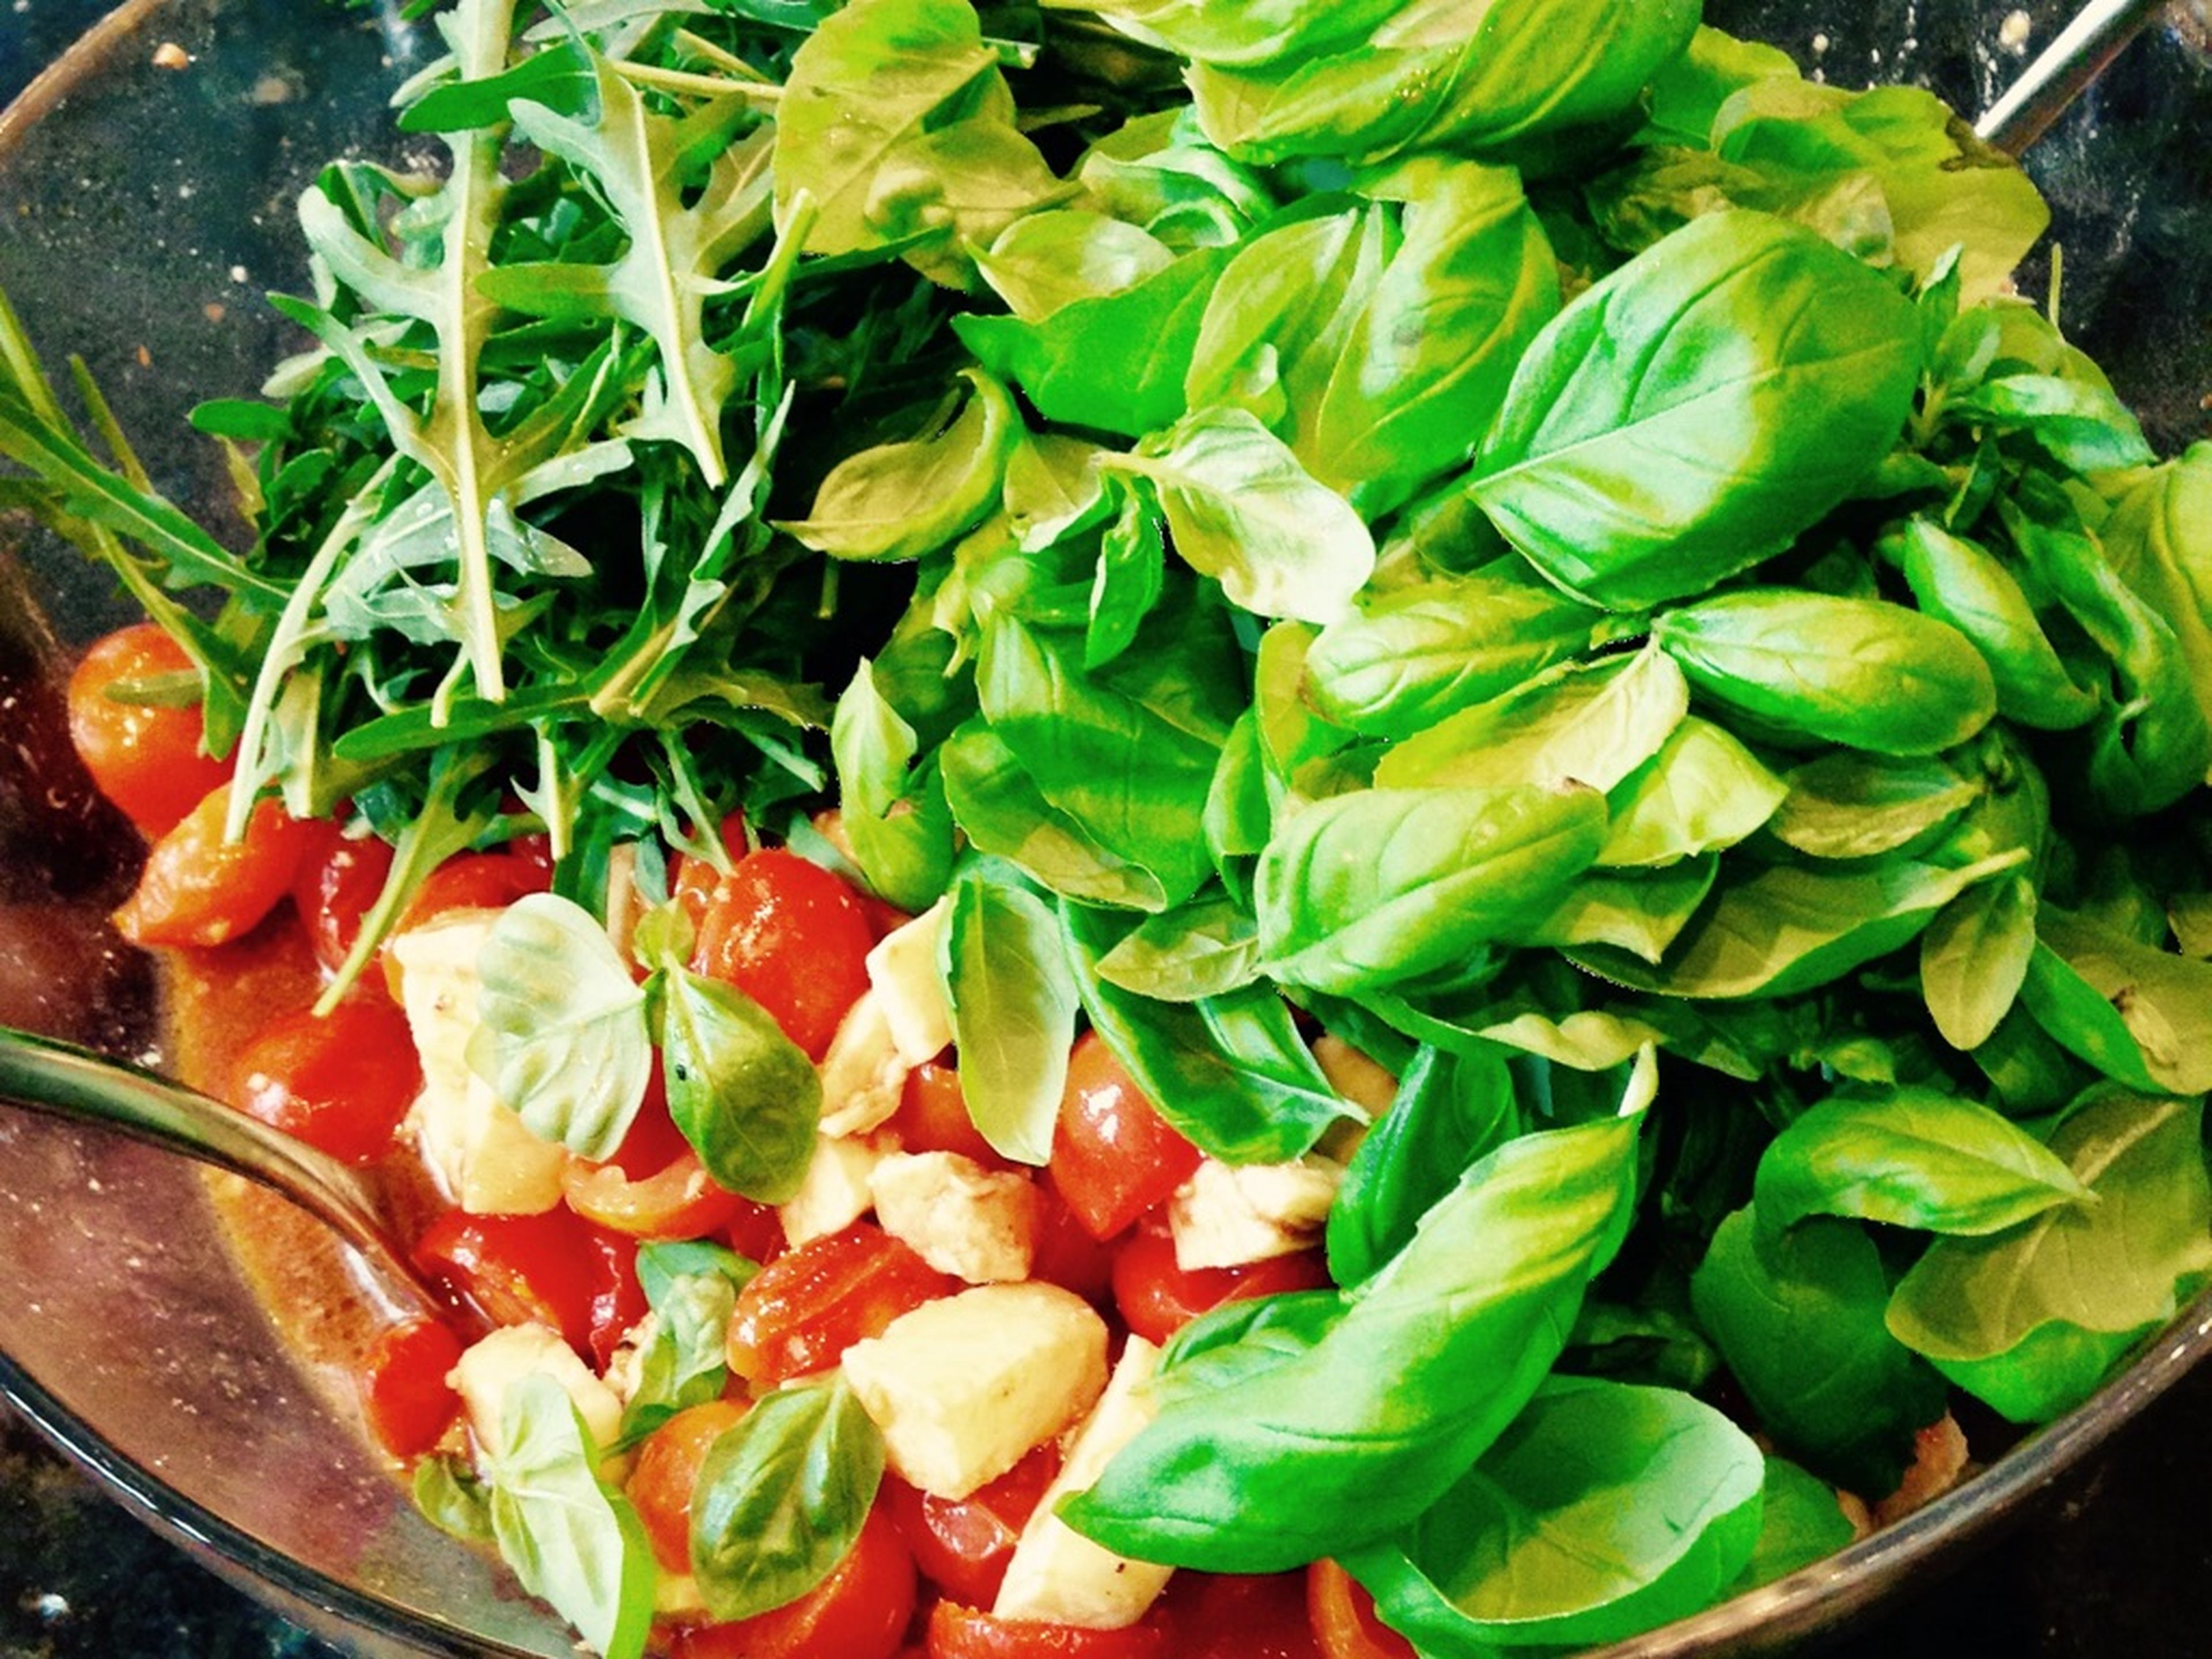 Add arugula and basil leaves to the bowl and stir to combine. Serve with a piece of fresh ciabatta bread or focaccia and enjoy!